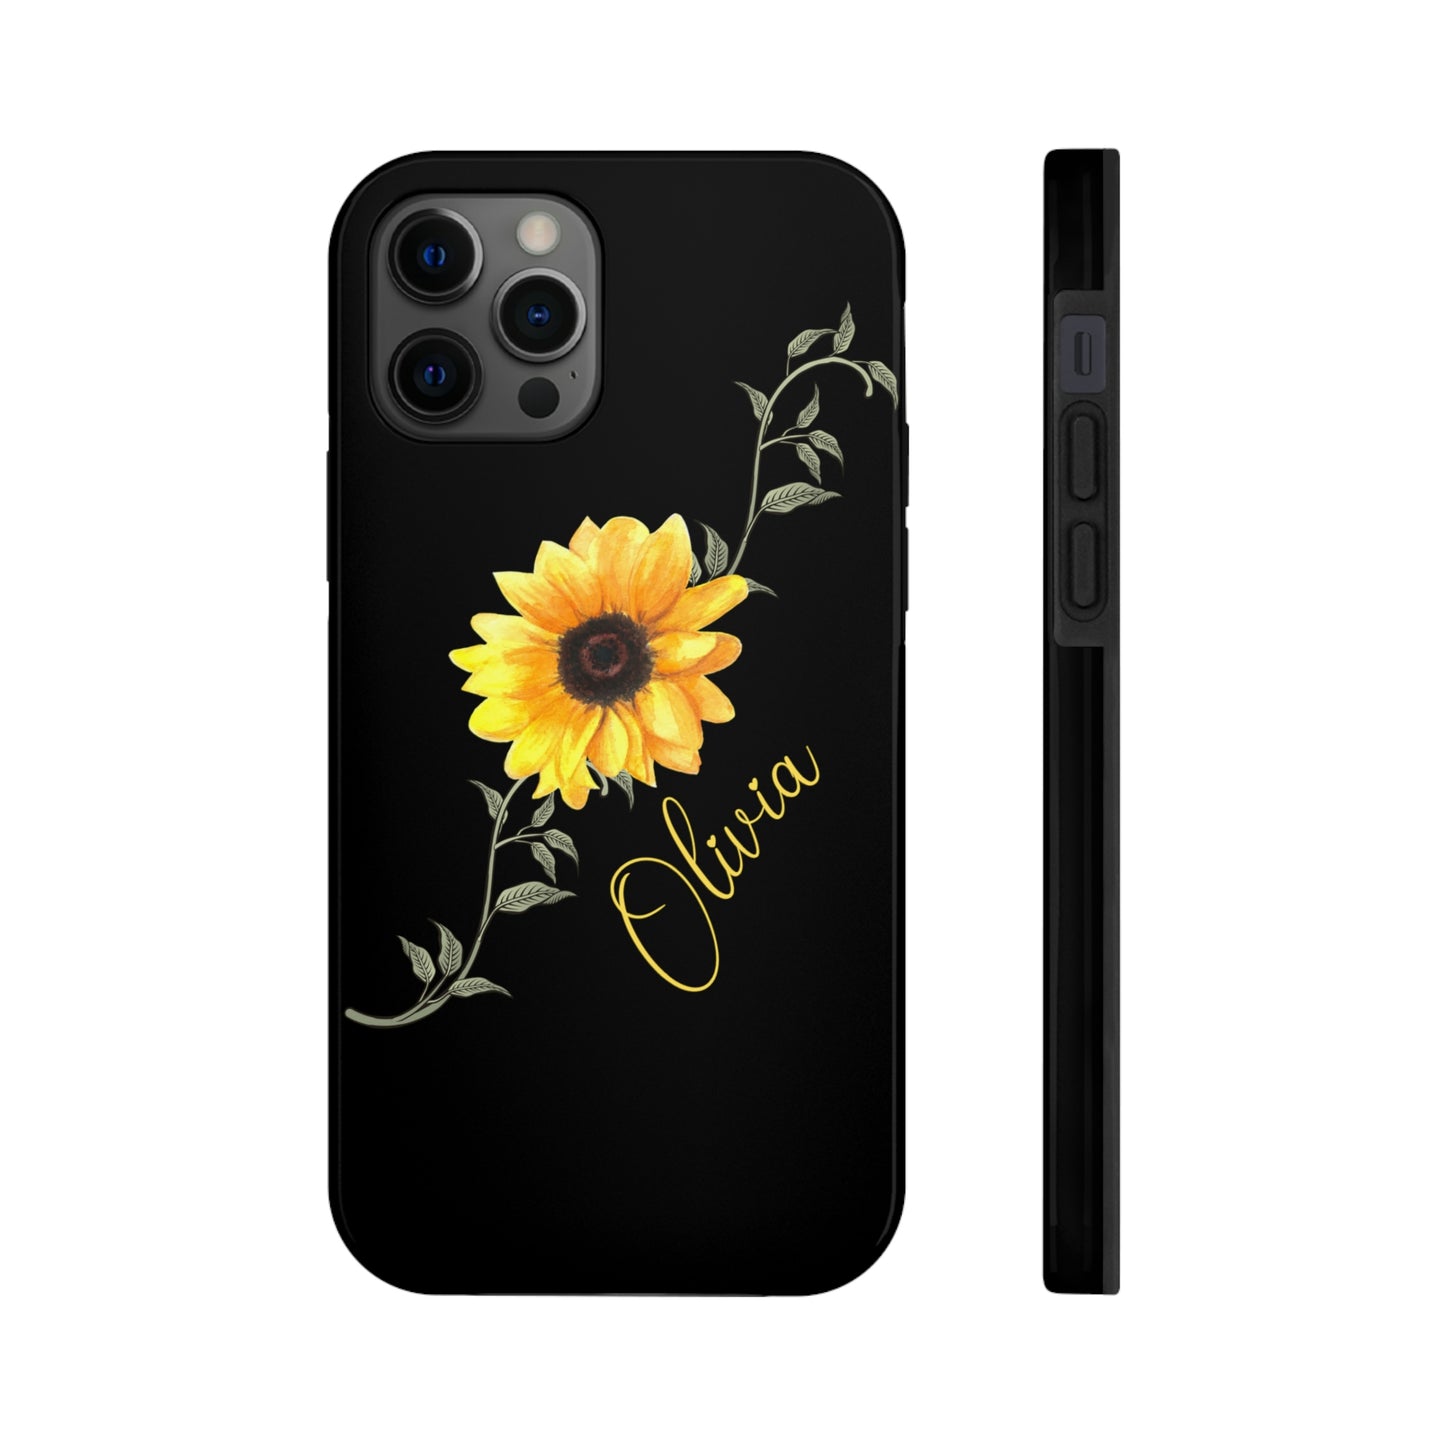 personalized black iphone case with yellow sunflower